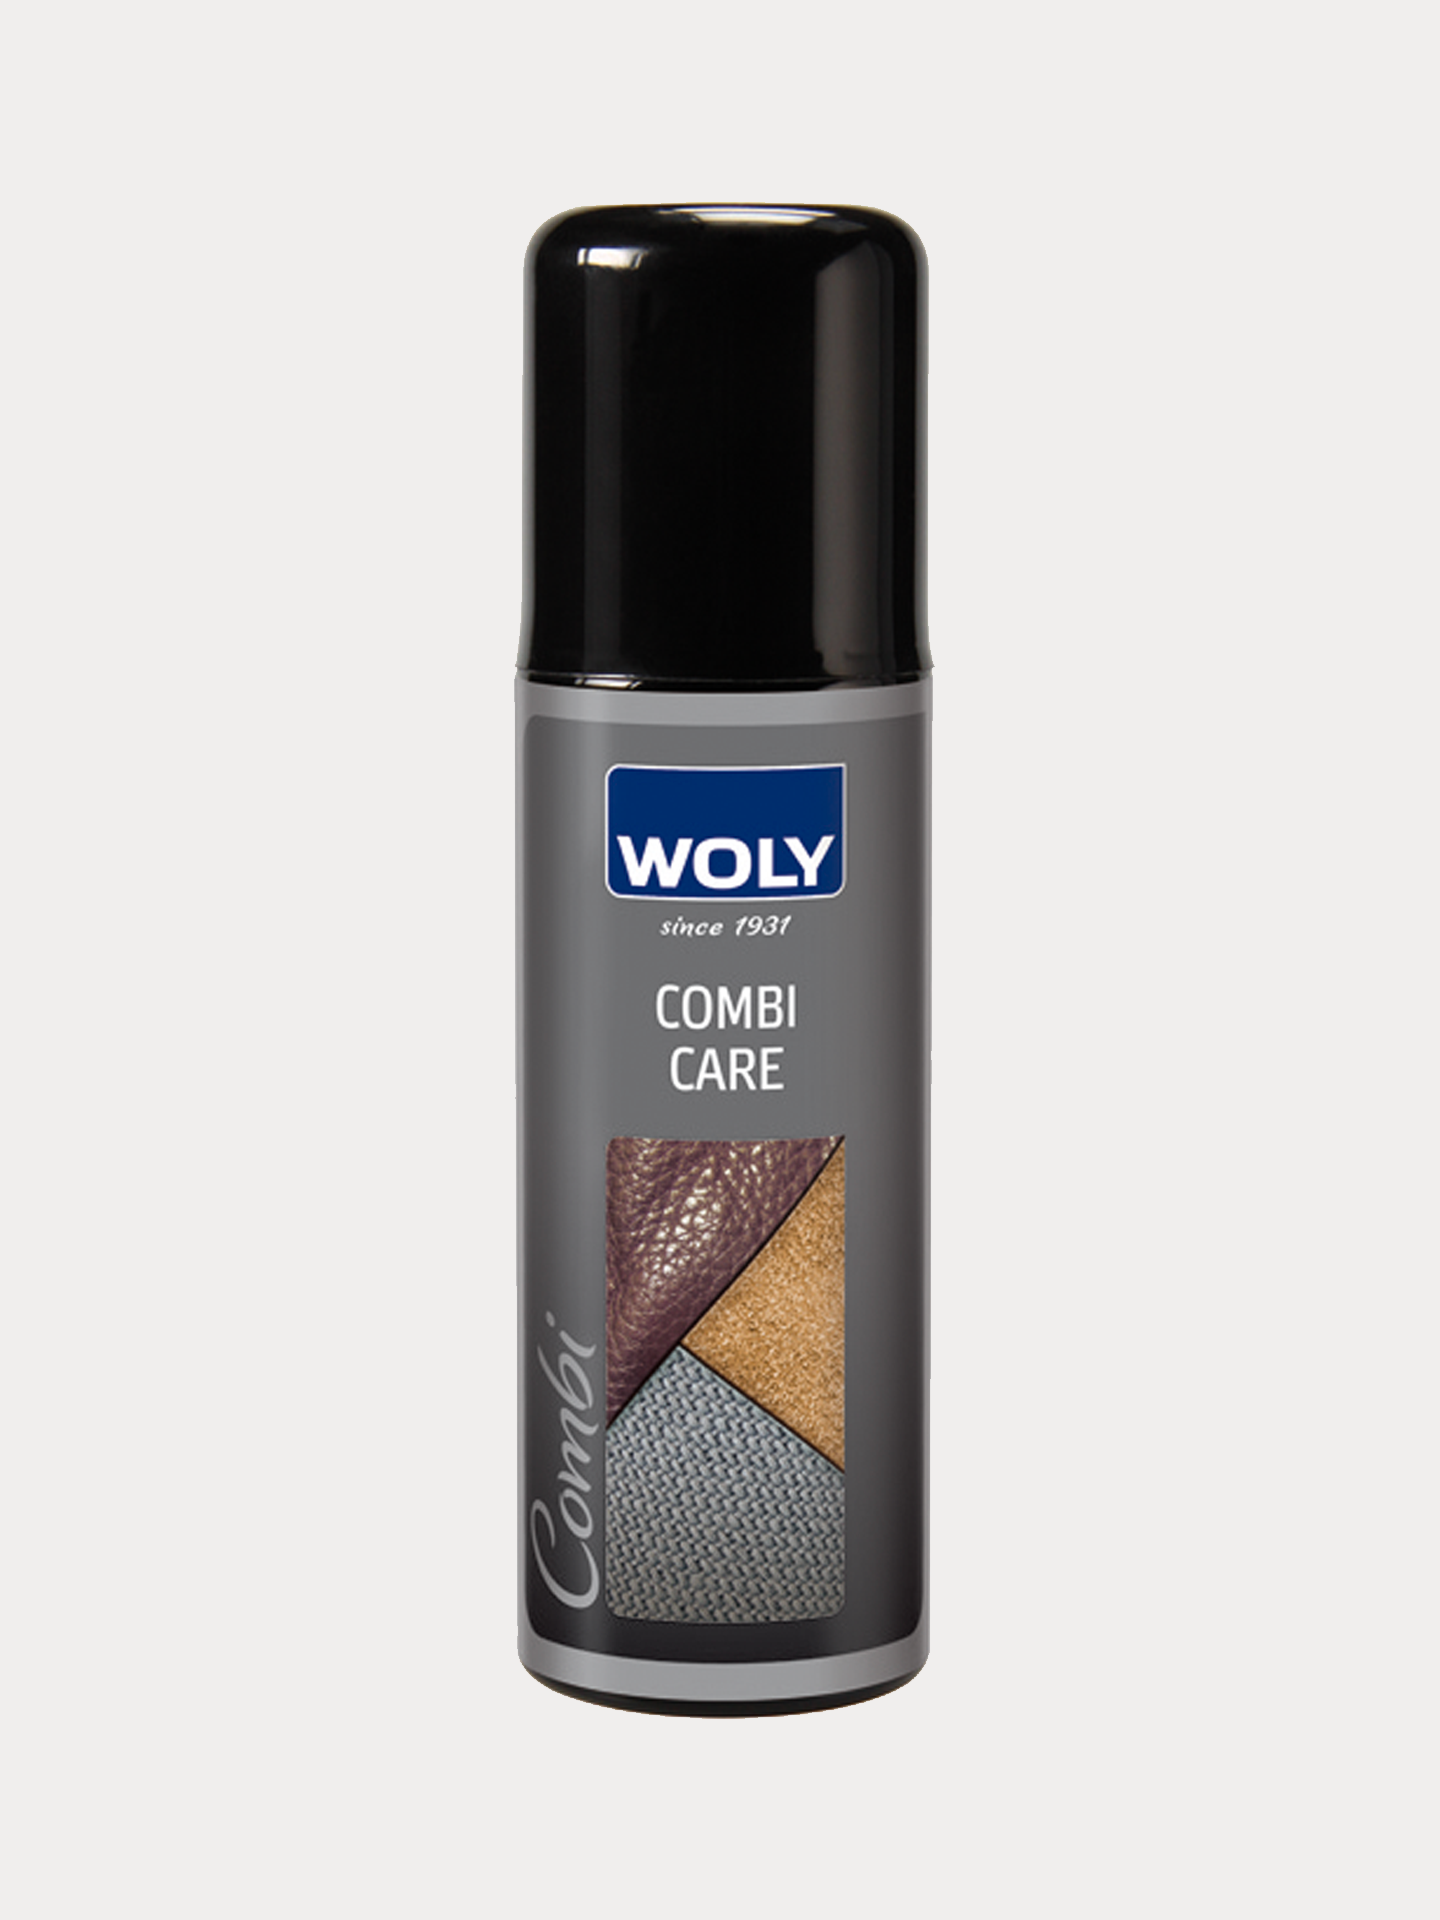 Woly Combi Care Polish for Neutral Leather